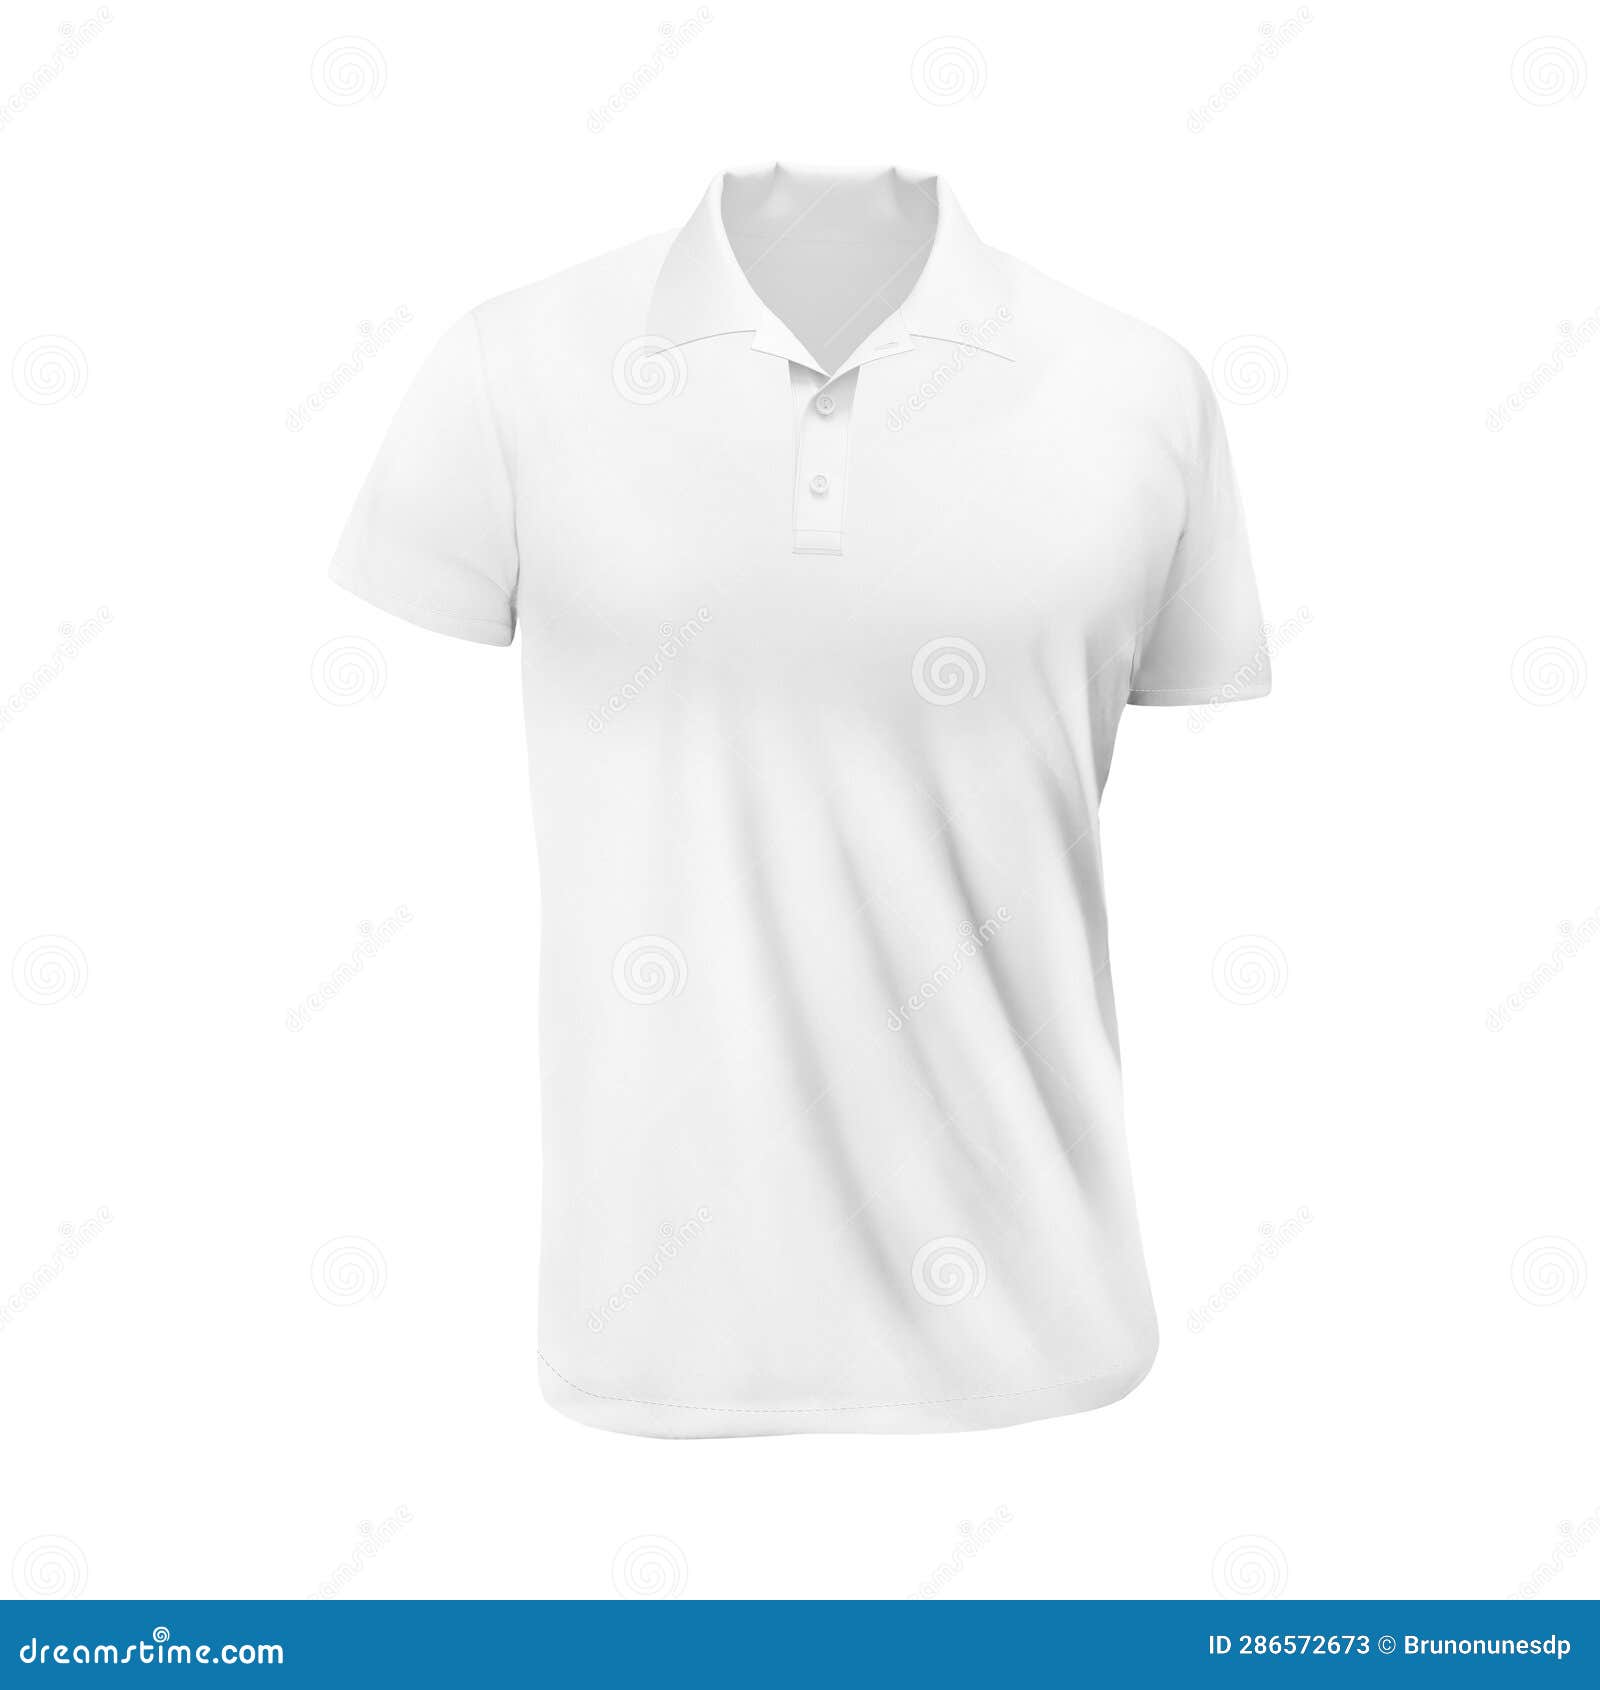 White Blank Polo T-shirt Template, Isolated on White Stock Image ...